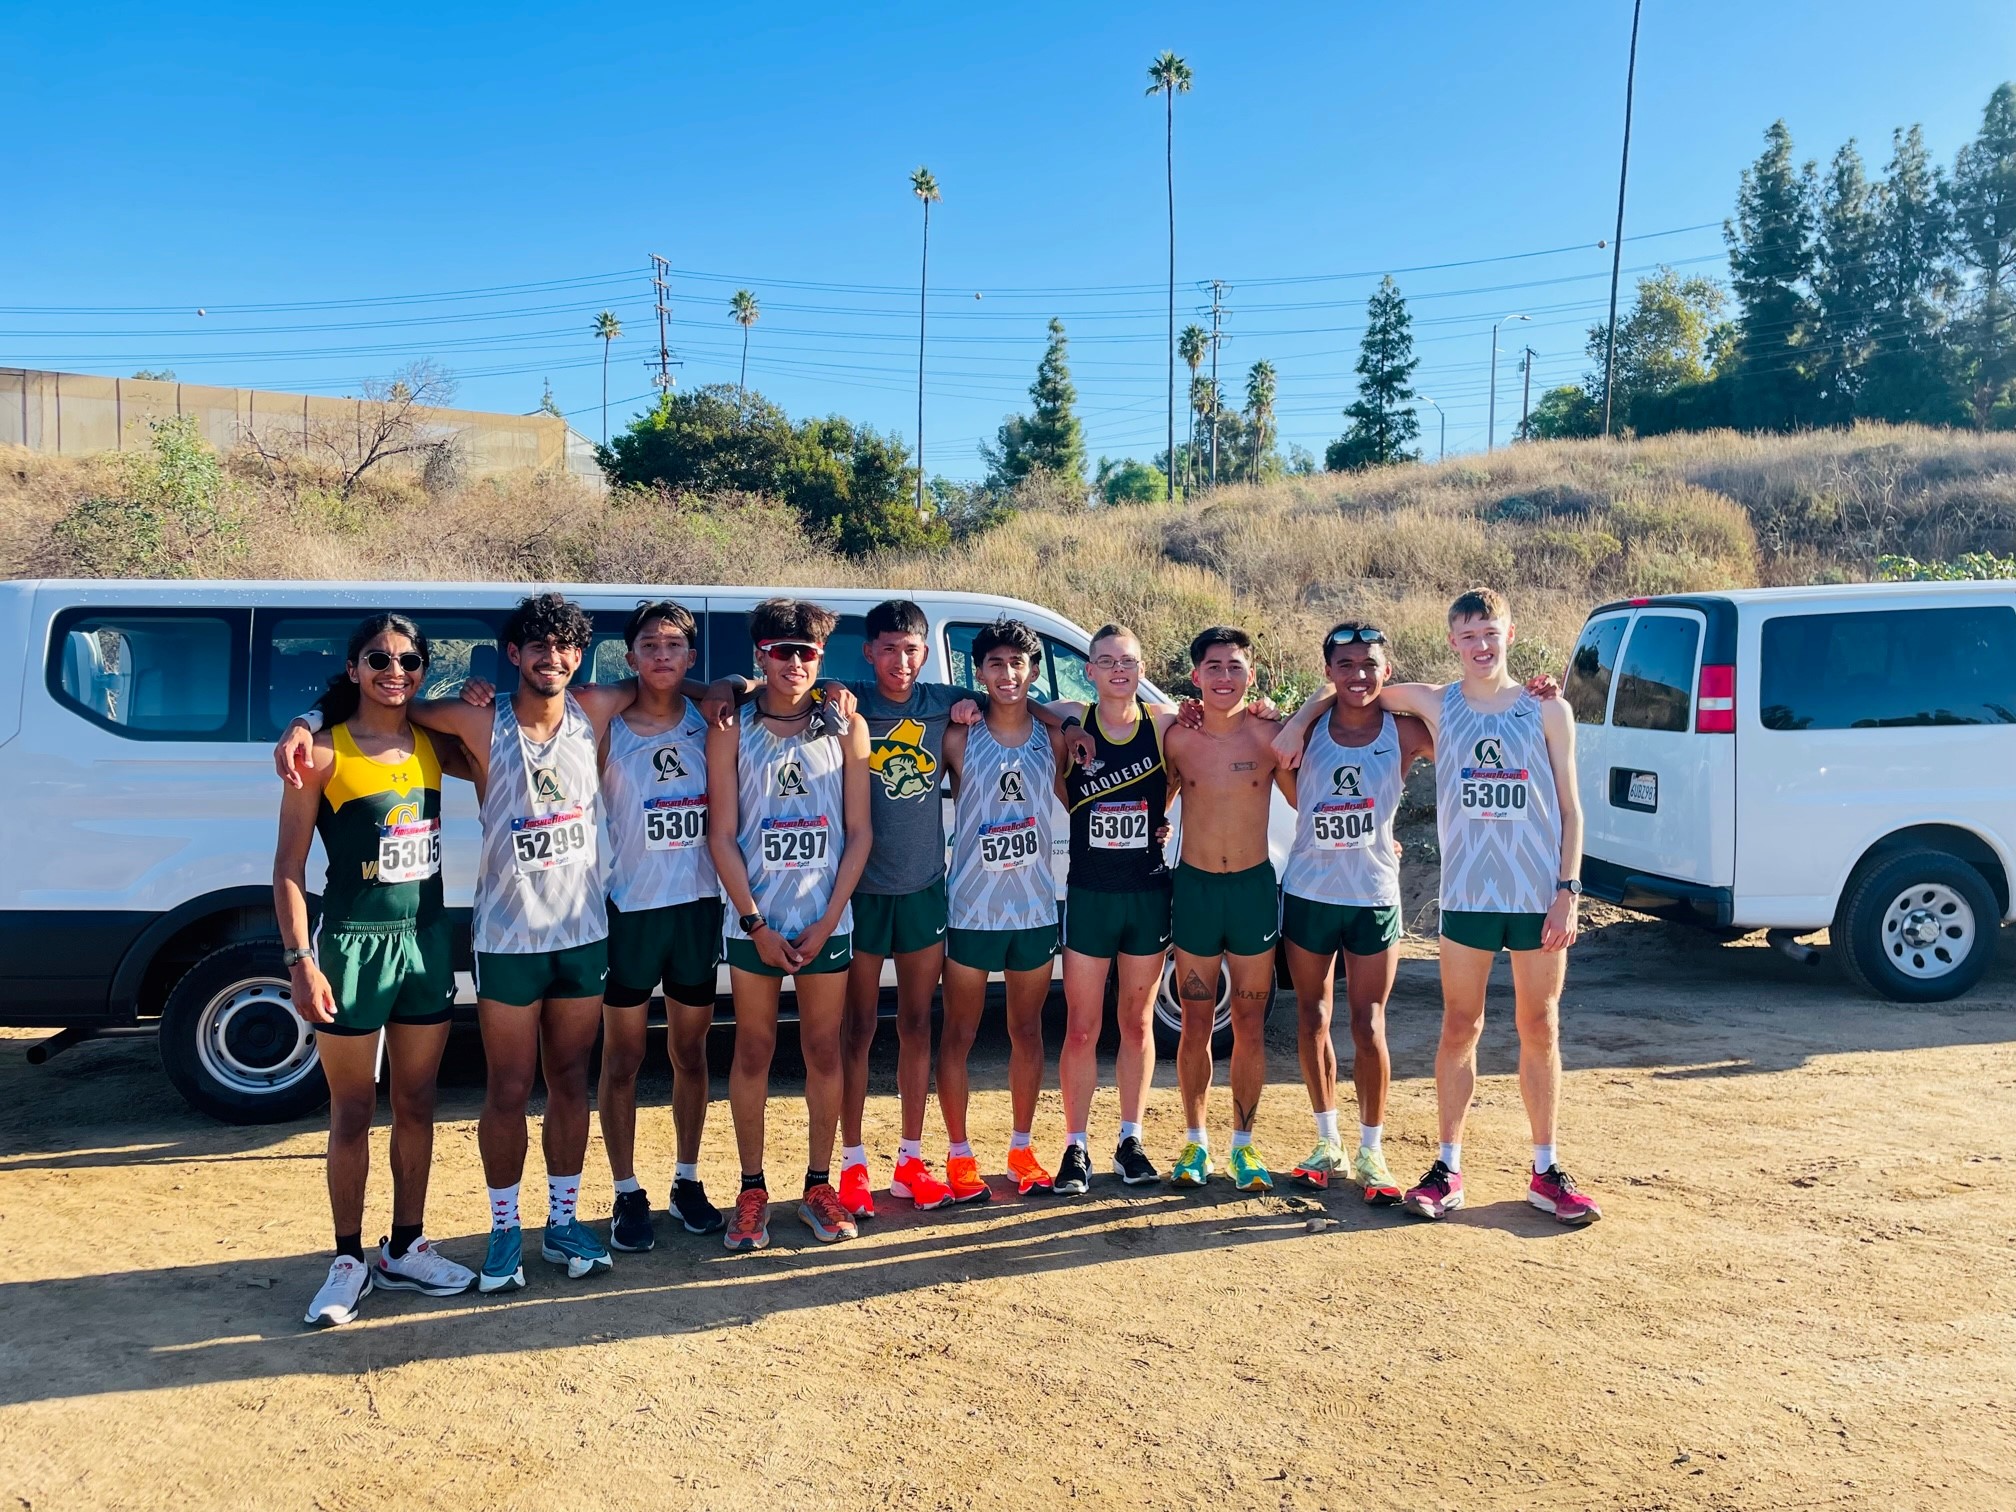 Vaqueros Place 11th out of 30 teams at the Highlander Invitational, Top Junior College.